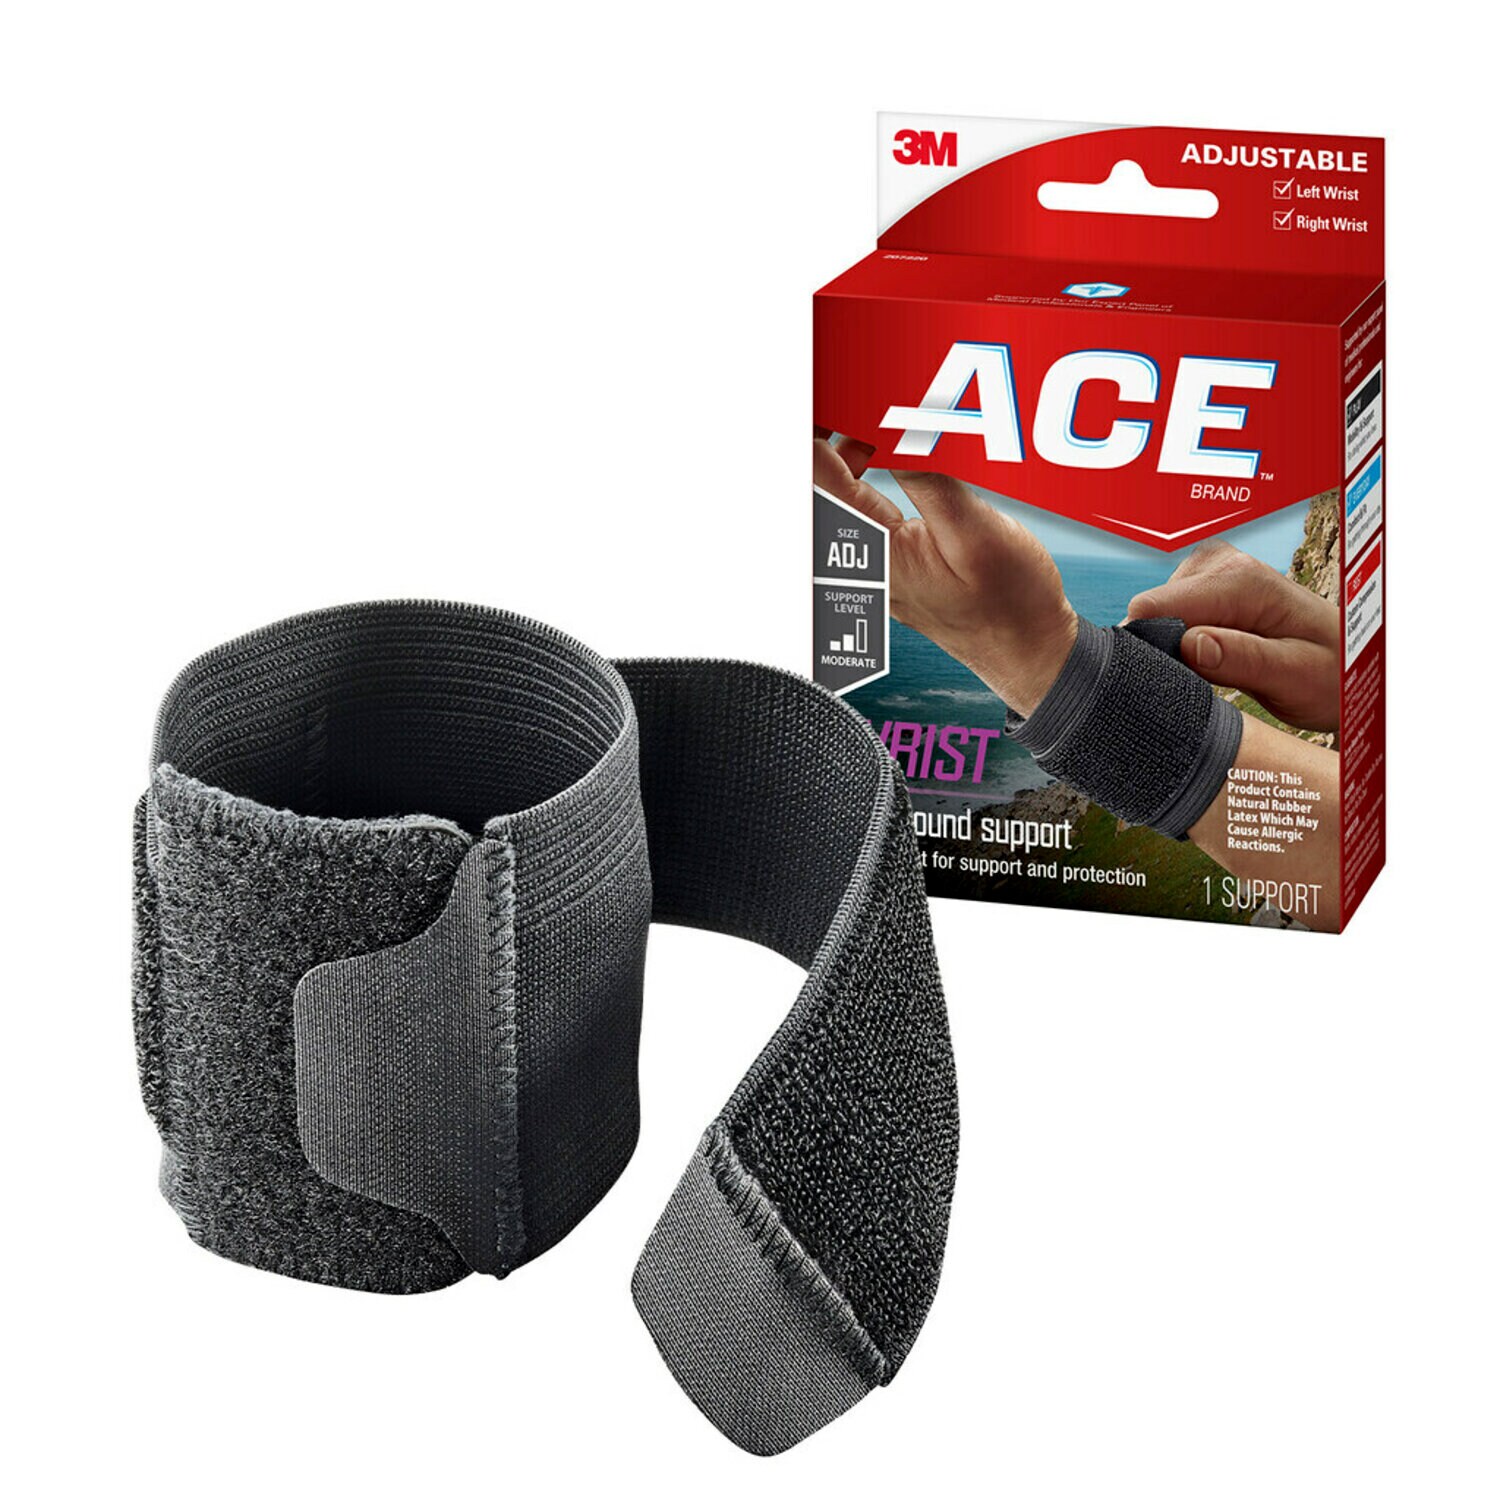 7100263067 - ACE Wrap Around Wrist Support 207220, One Size Adjustable